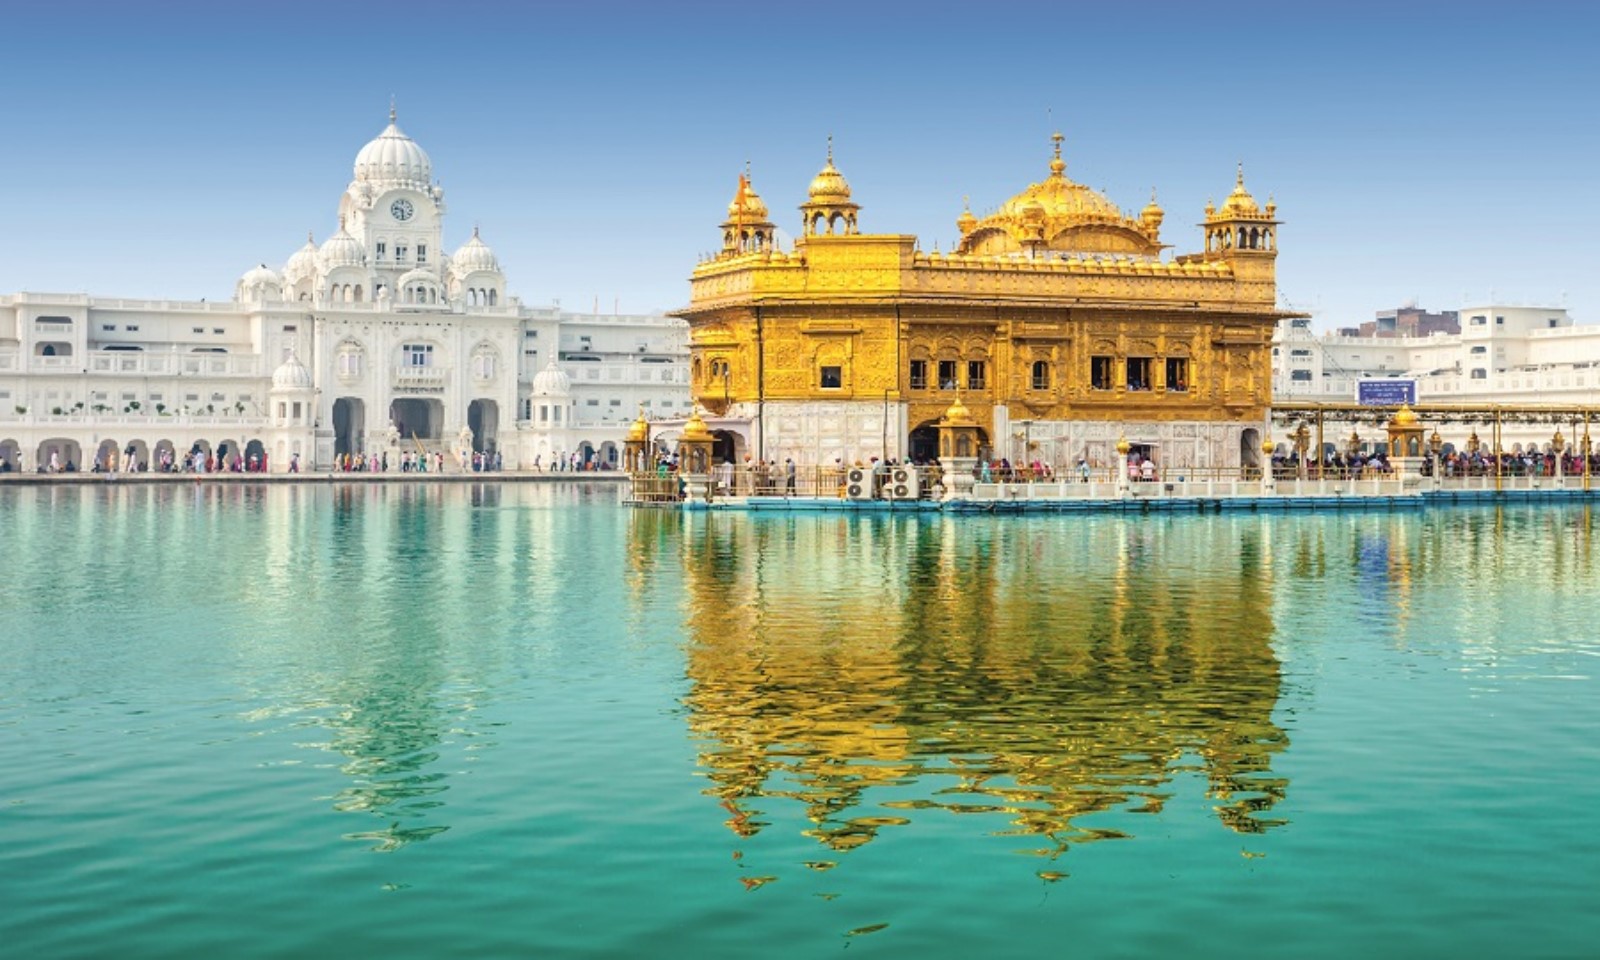 Regious Wallpaper for wall |Famous Golden Temple India